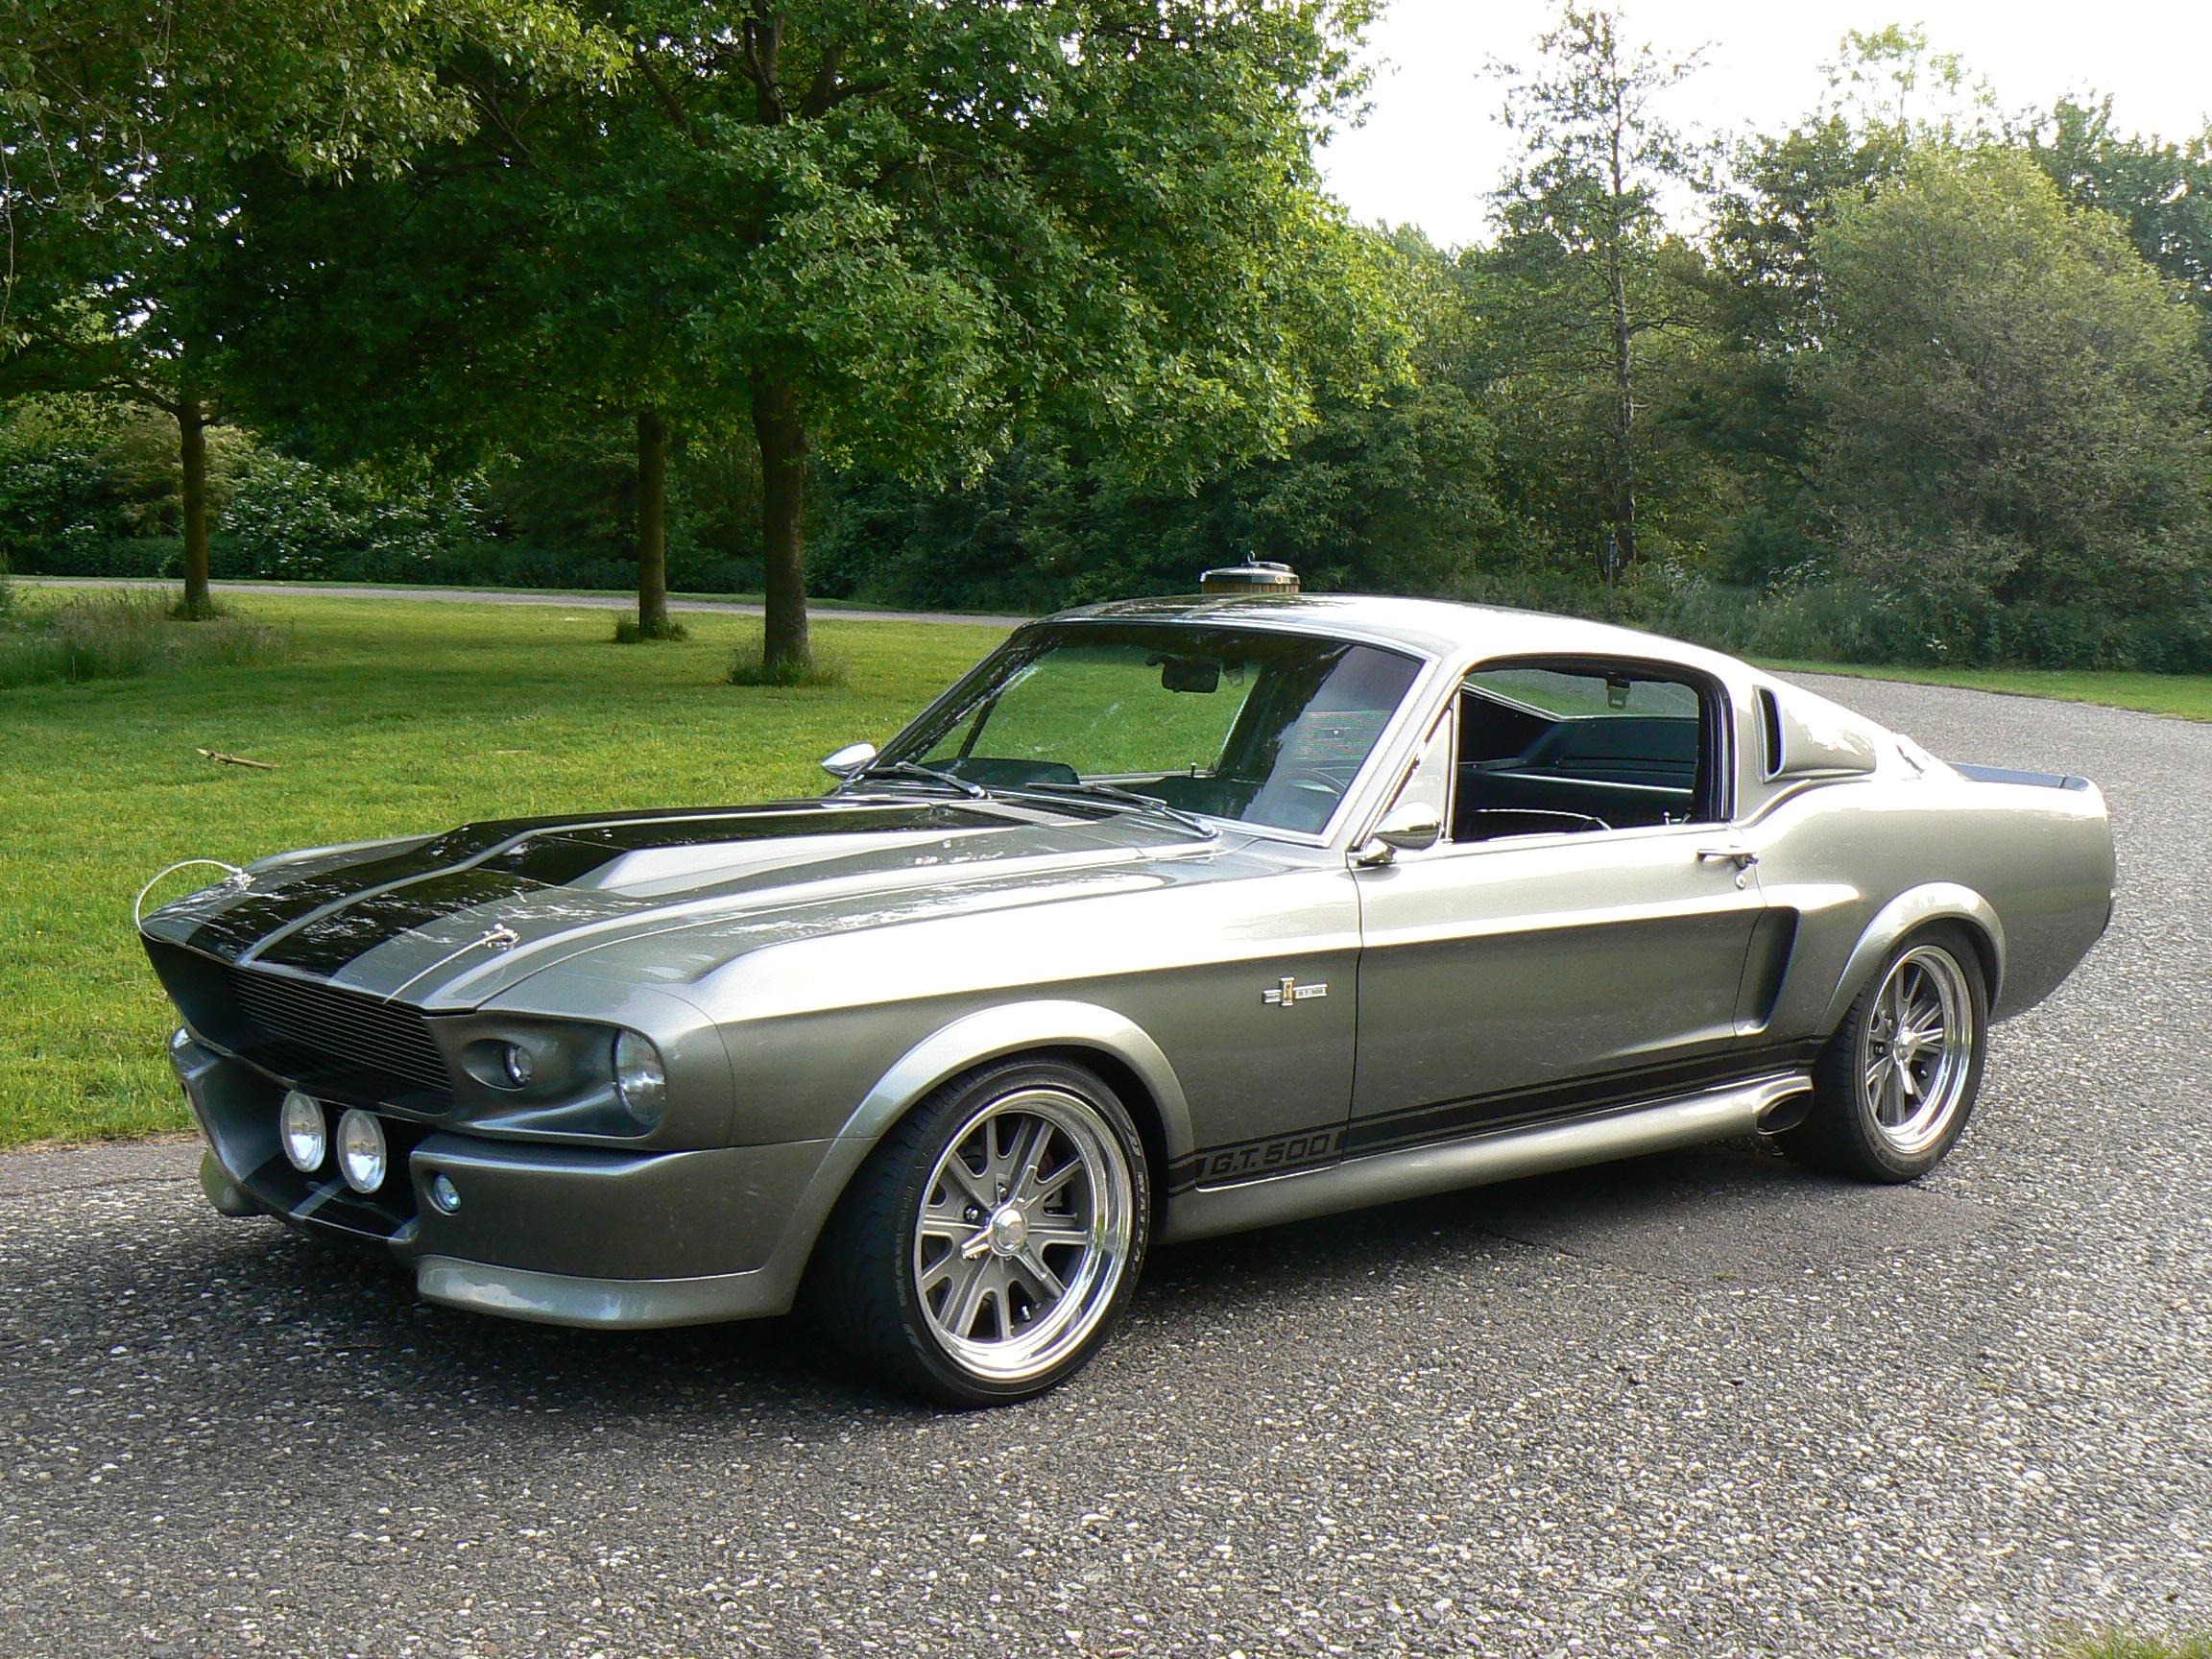 1967 Ford Mustang GT500 Tribute Eleanor Up on Sale on eBay ...
 1967 Ford Mustang Eleanor